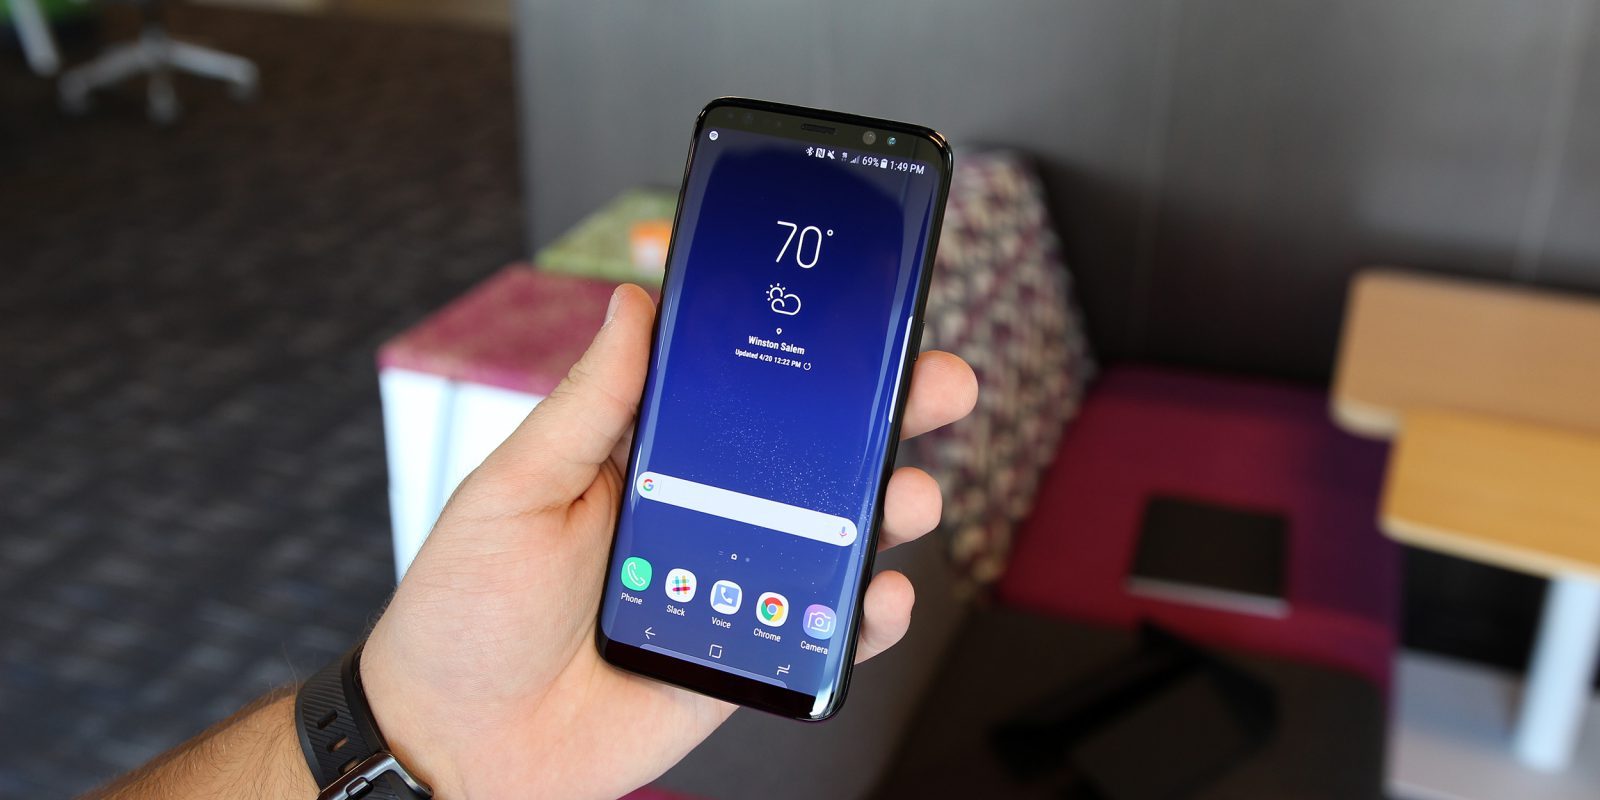 Samsung Experience 9.0 for Galaxy S8 and S8+. Features